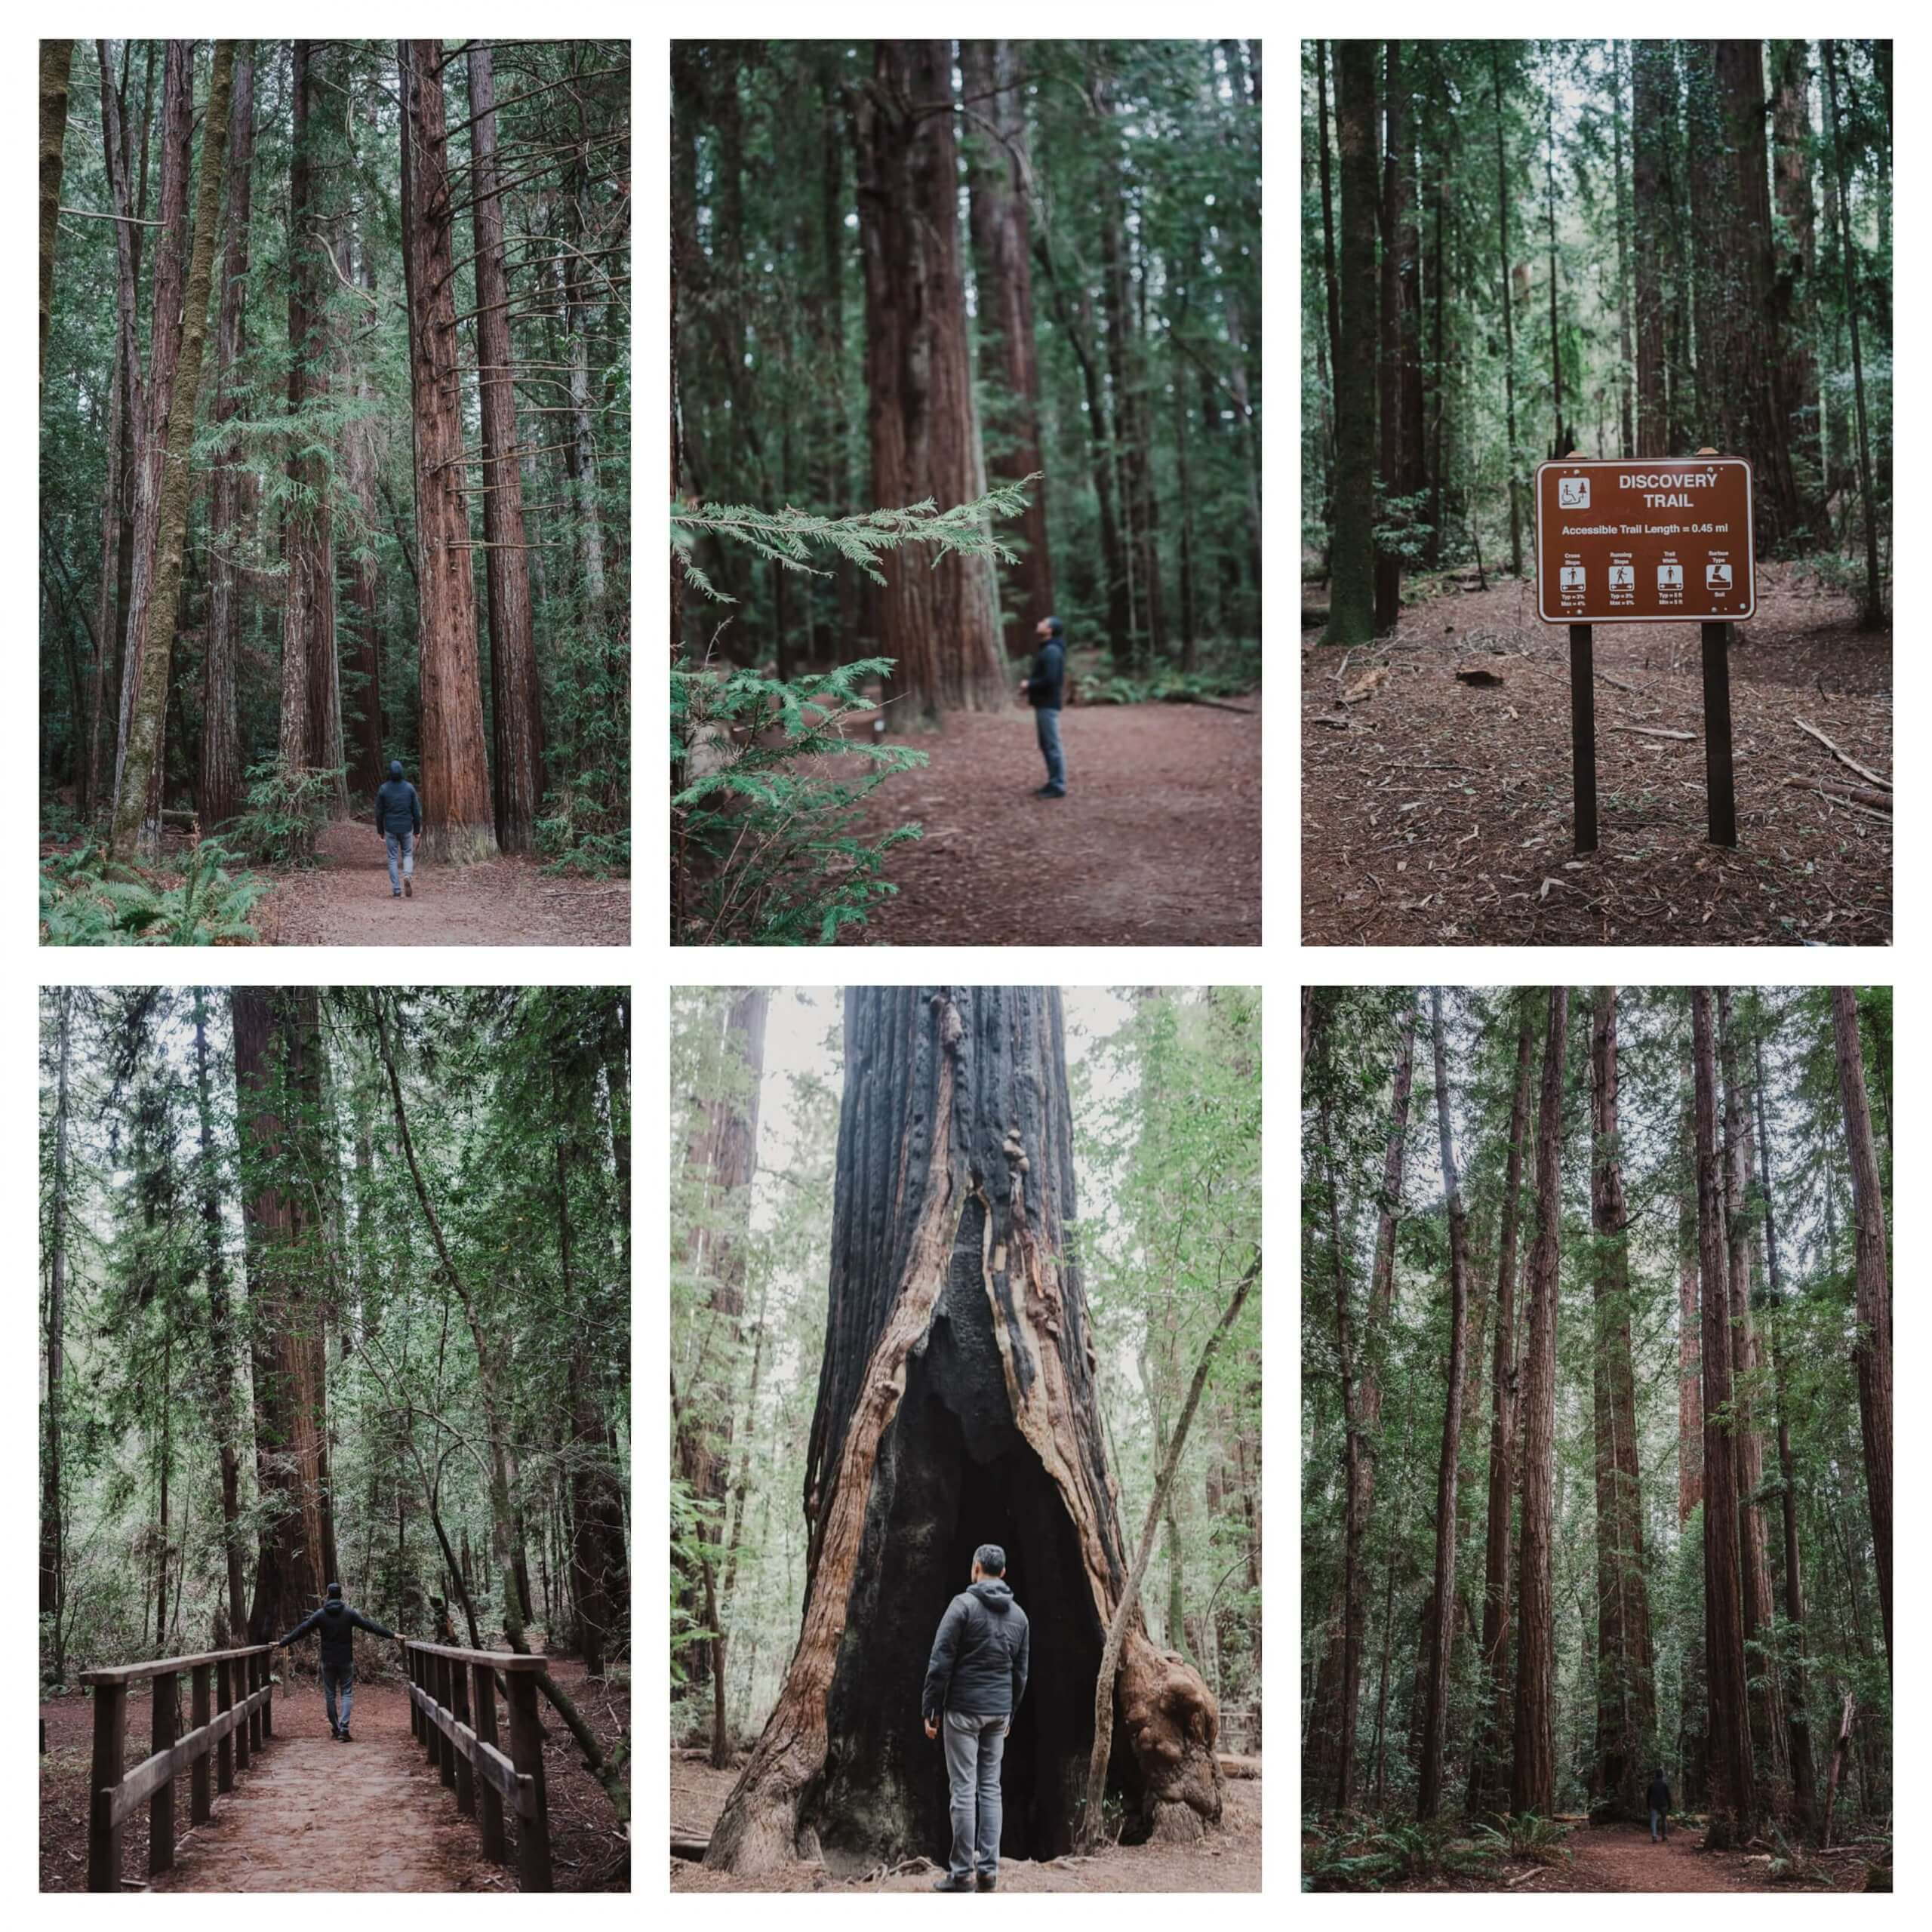 Hiking in the Redwoods in Anderson Valley